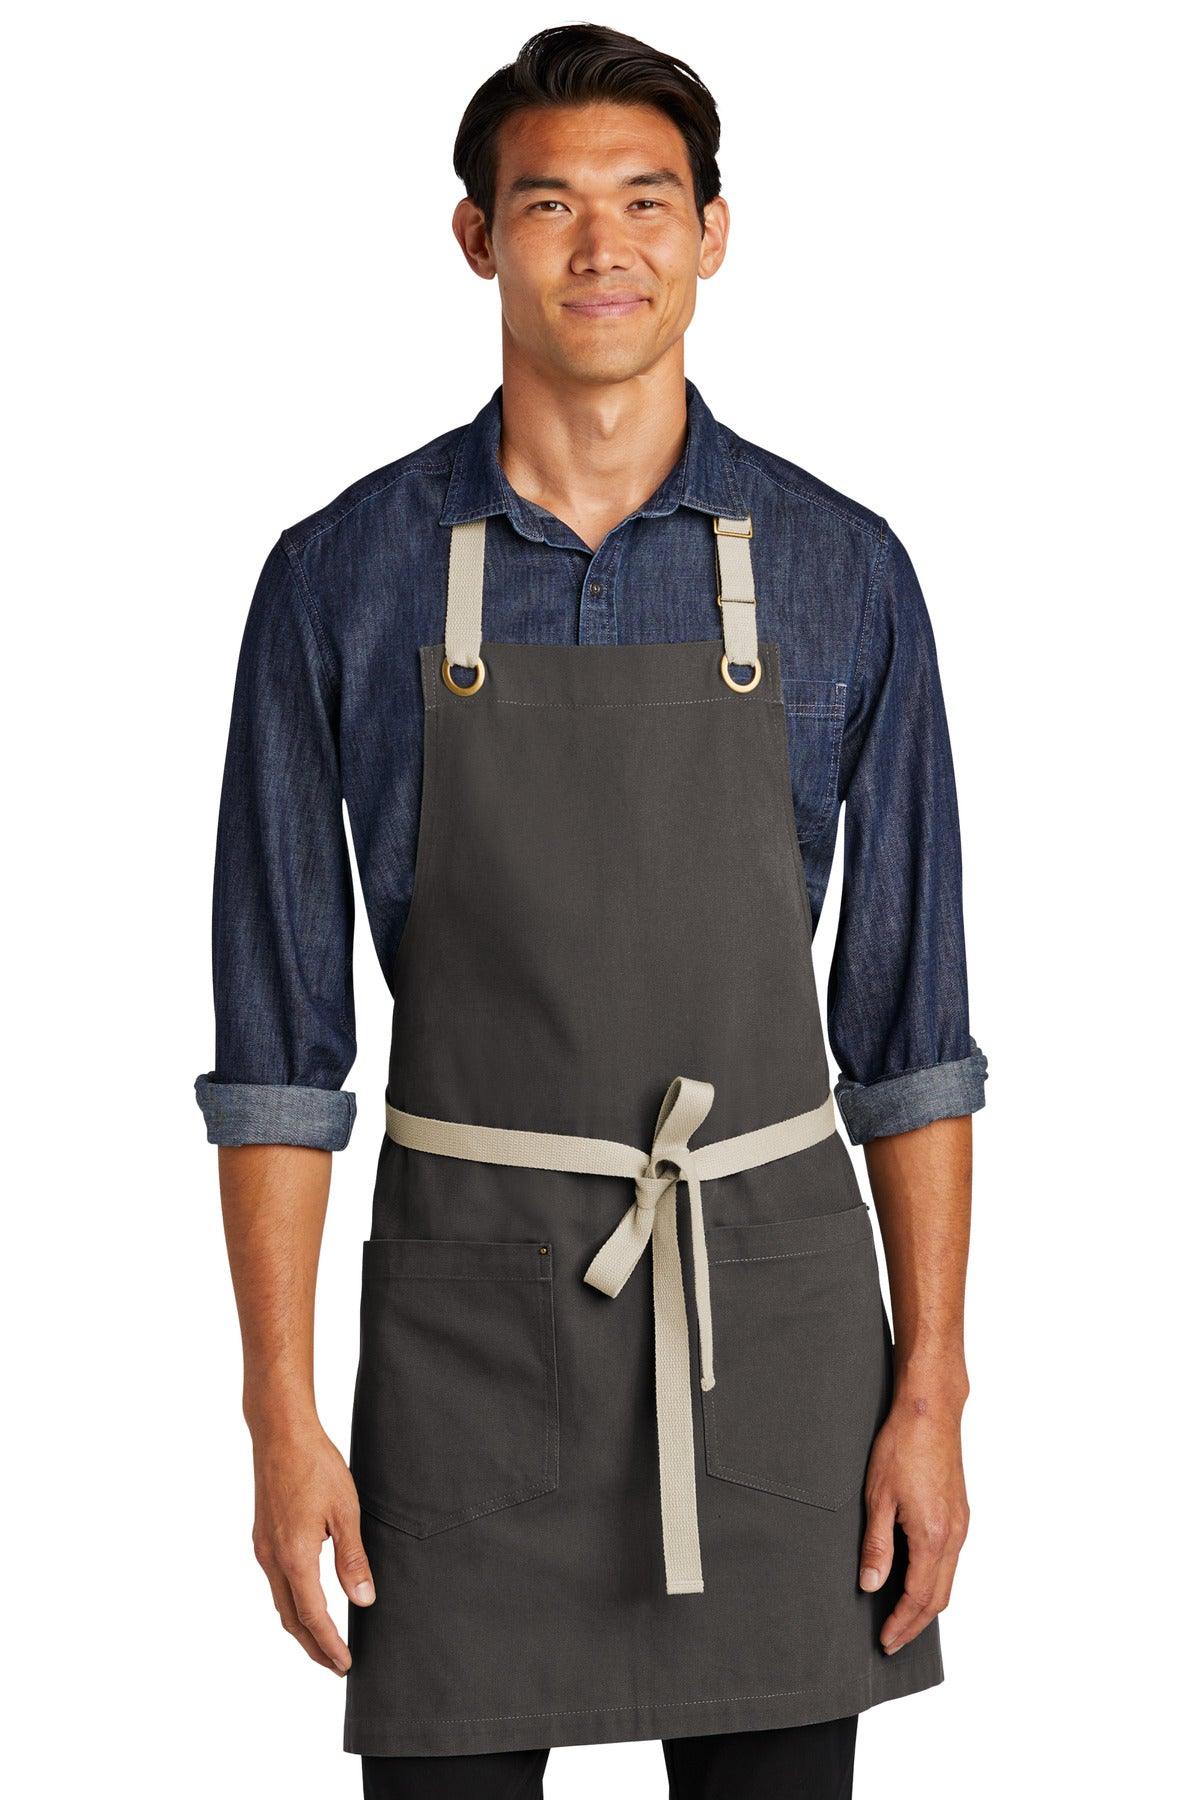 Port Authority Canvas Full-Length Two-Pocket Apron A815 - Dresses Max